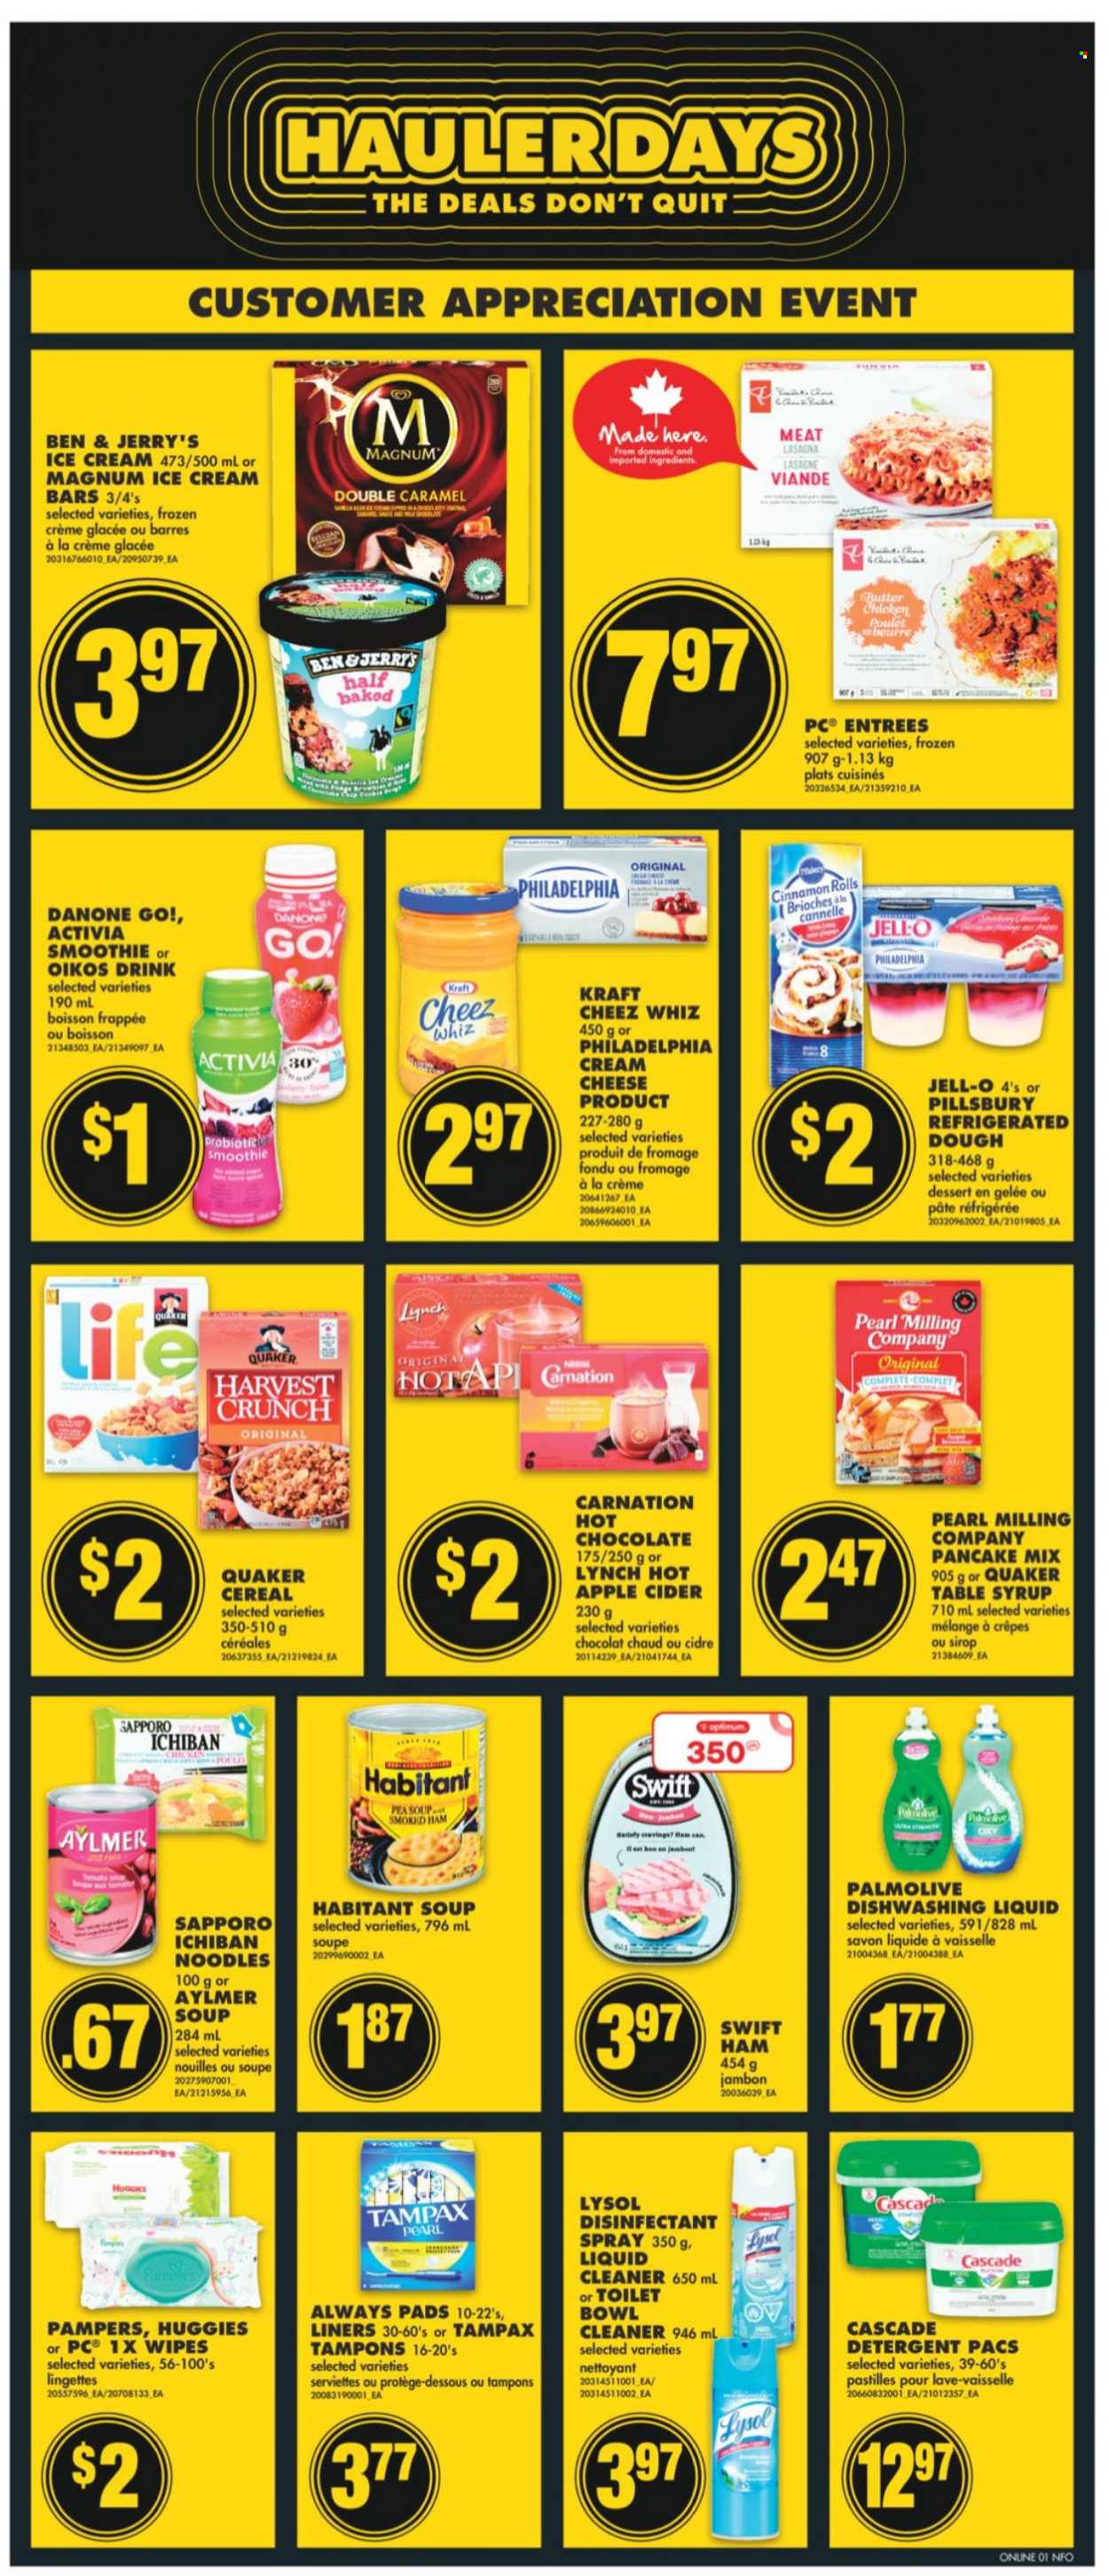 thumbnail - No Frills Flyer - October 21, 2021 - October 27, 2021 - Sales products - cinnamon roll, soup, pancakes, Pillsbury, Quaker, noodles, lasagna meal, Kraft®, ham, smoked ham, cream cheese, cheese, Activia, Oikos, Magnum, ice cream bars, Ben & Jerry's, pastilles, Jell-O, cereals, syrup, smoothie, hot chocolate, apple cider, cider, wipes, cleaner, liquid cleaner, Lysol, Cascade, dishwashing liquid, Palmolive, Always pads, tampons, antibacterial spray, table, Go!, Danone, detergent, Tampax, Huggies, Philadelphia, Pampers, desinfection. Page 6.